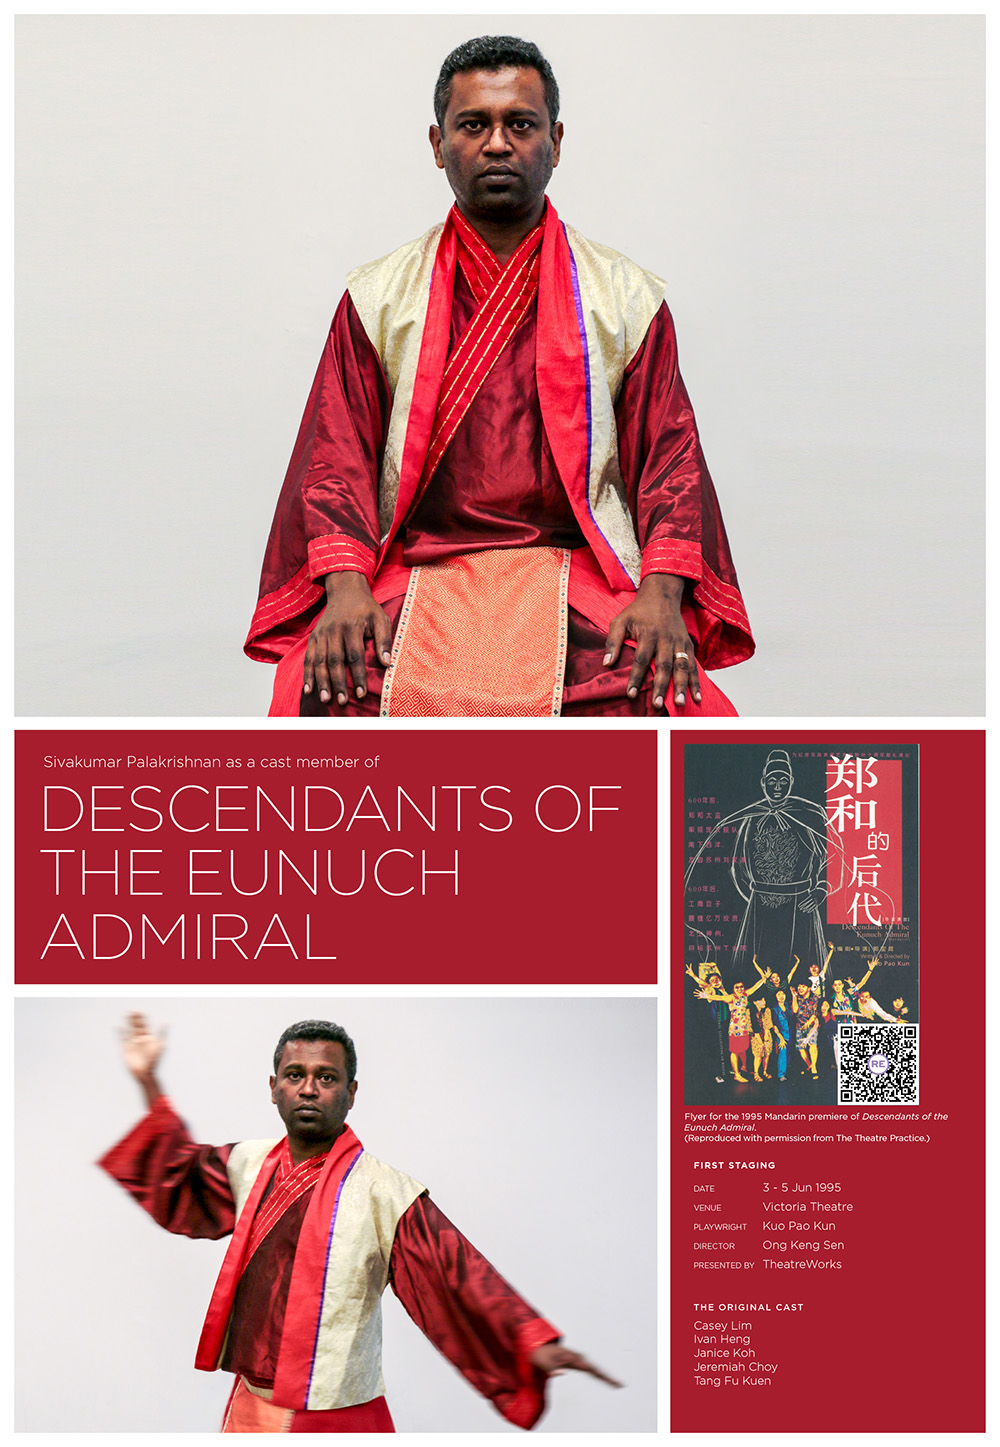 The top half of the poster features an ethnic Indian man dressed in a Chinese costume typically worn by commoners in period dramas. The bottom half of the image features the production history of Descendants of the Eunuch Admiral